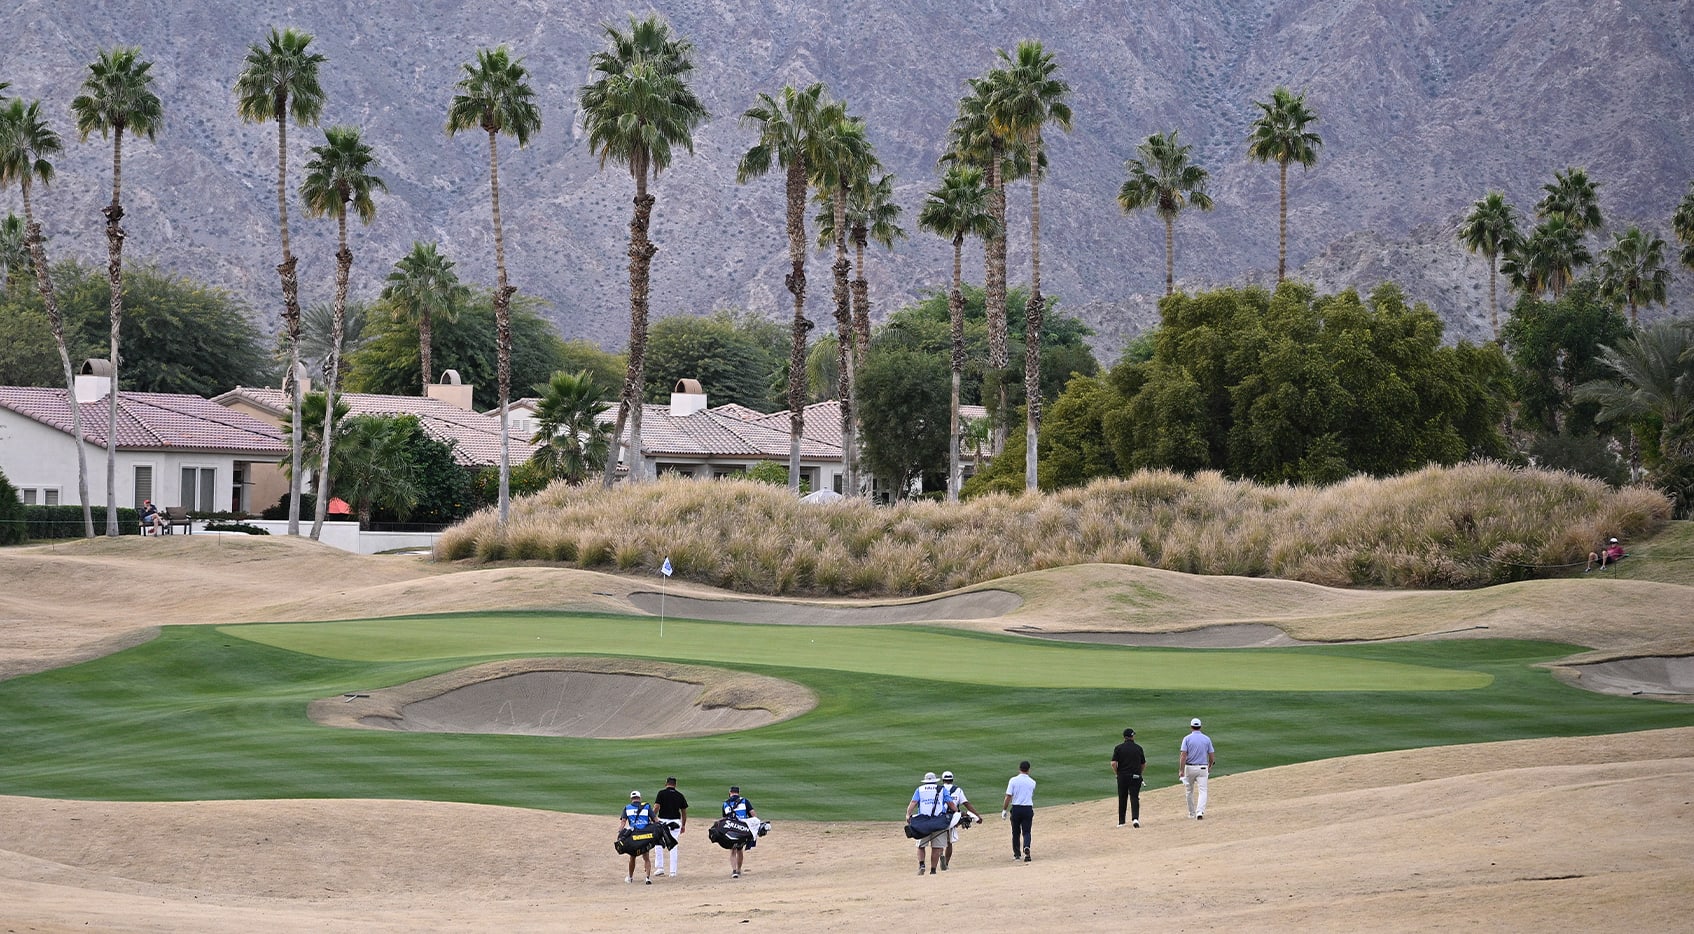 American Express: Golf courses part of appeal for golfers at PGA Tour event